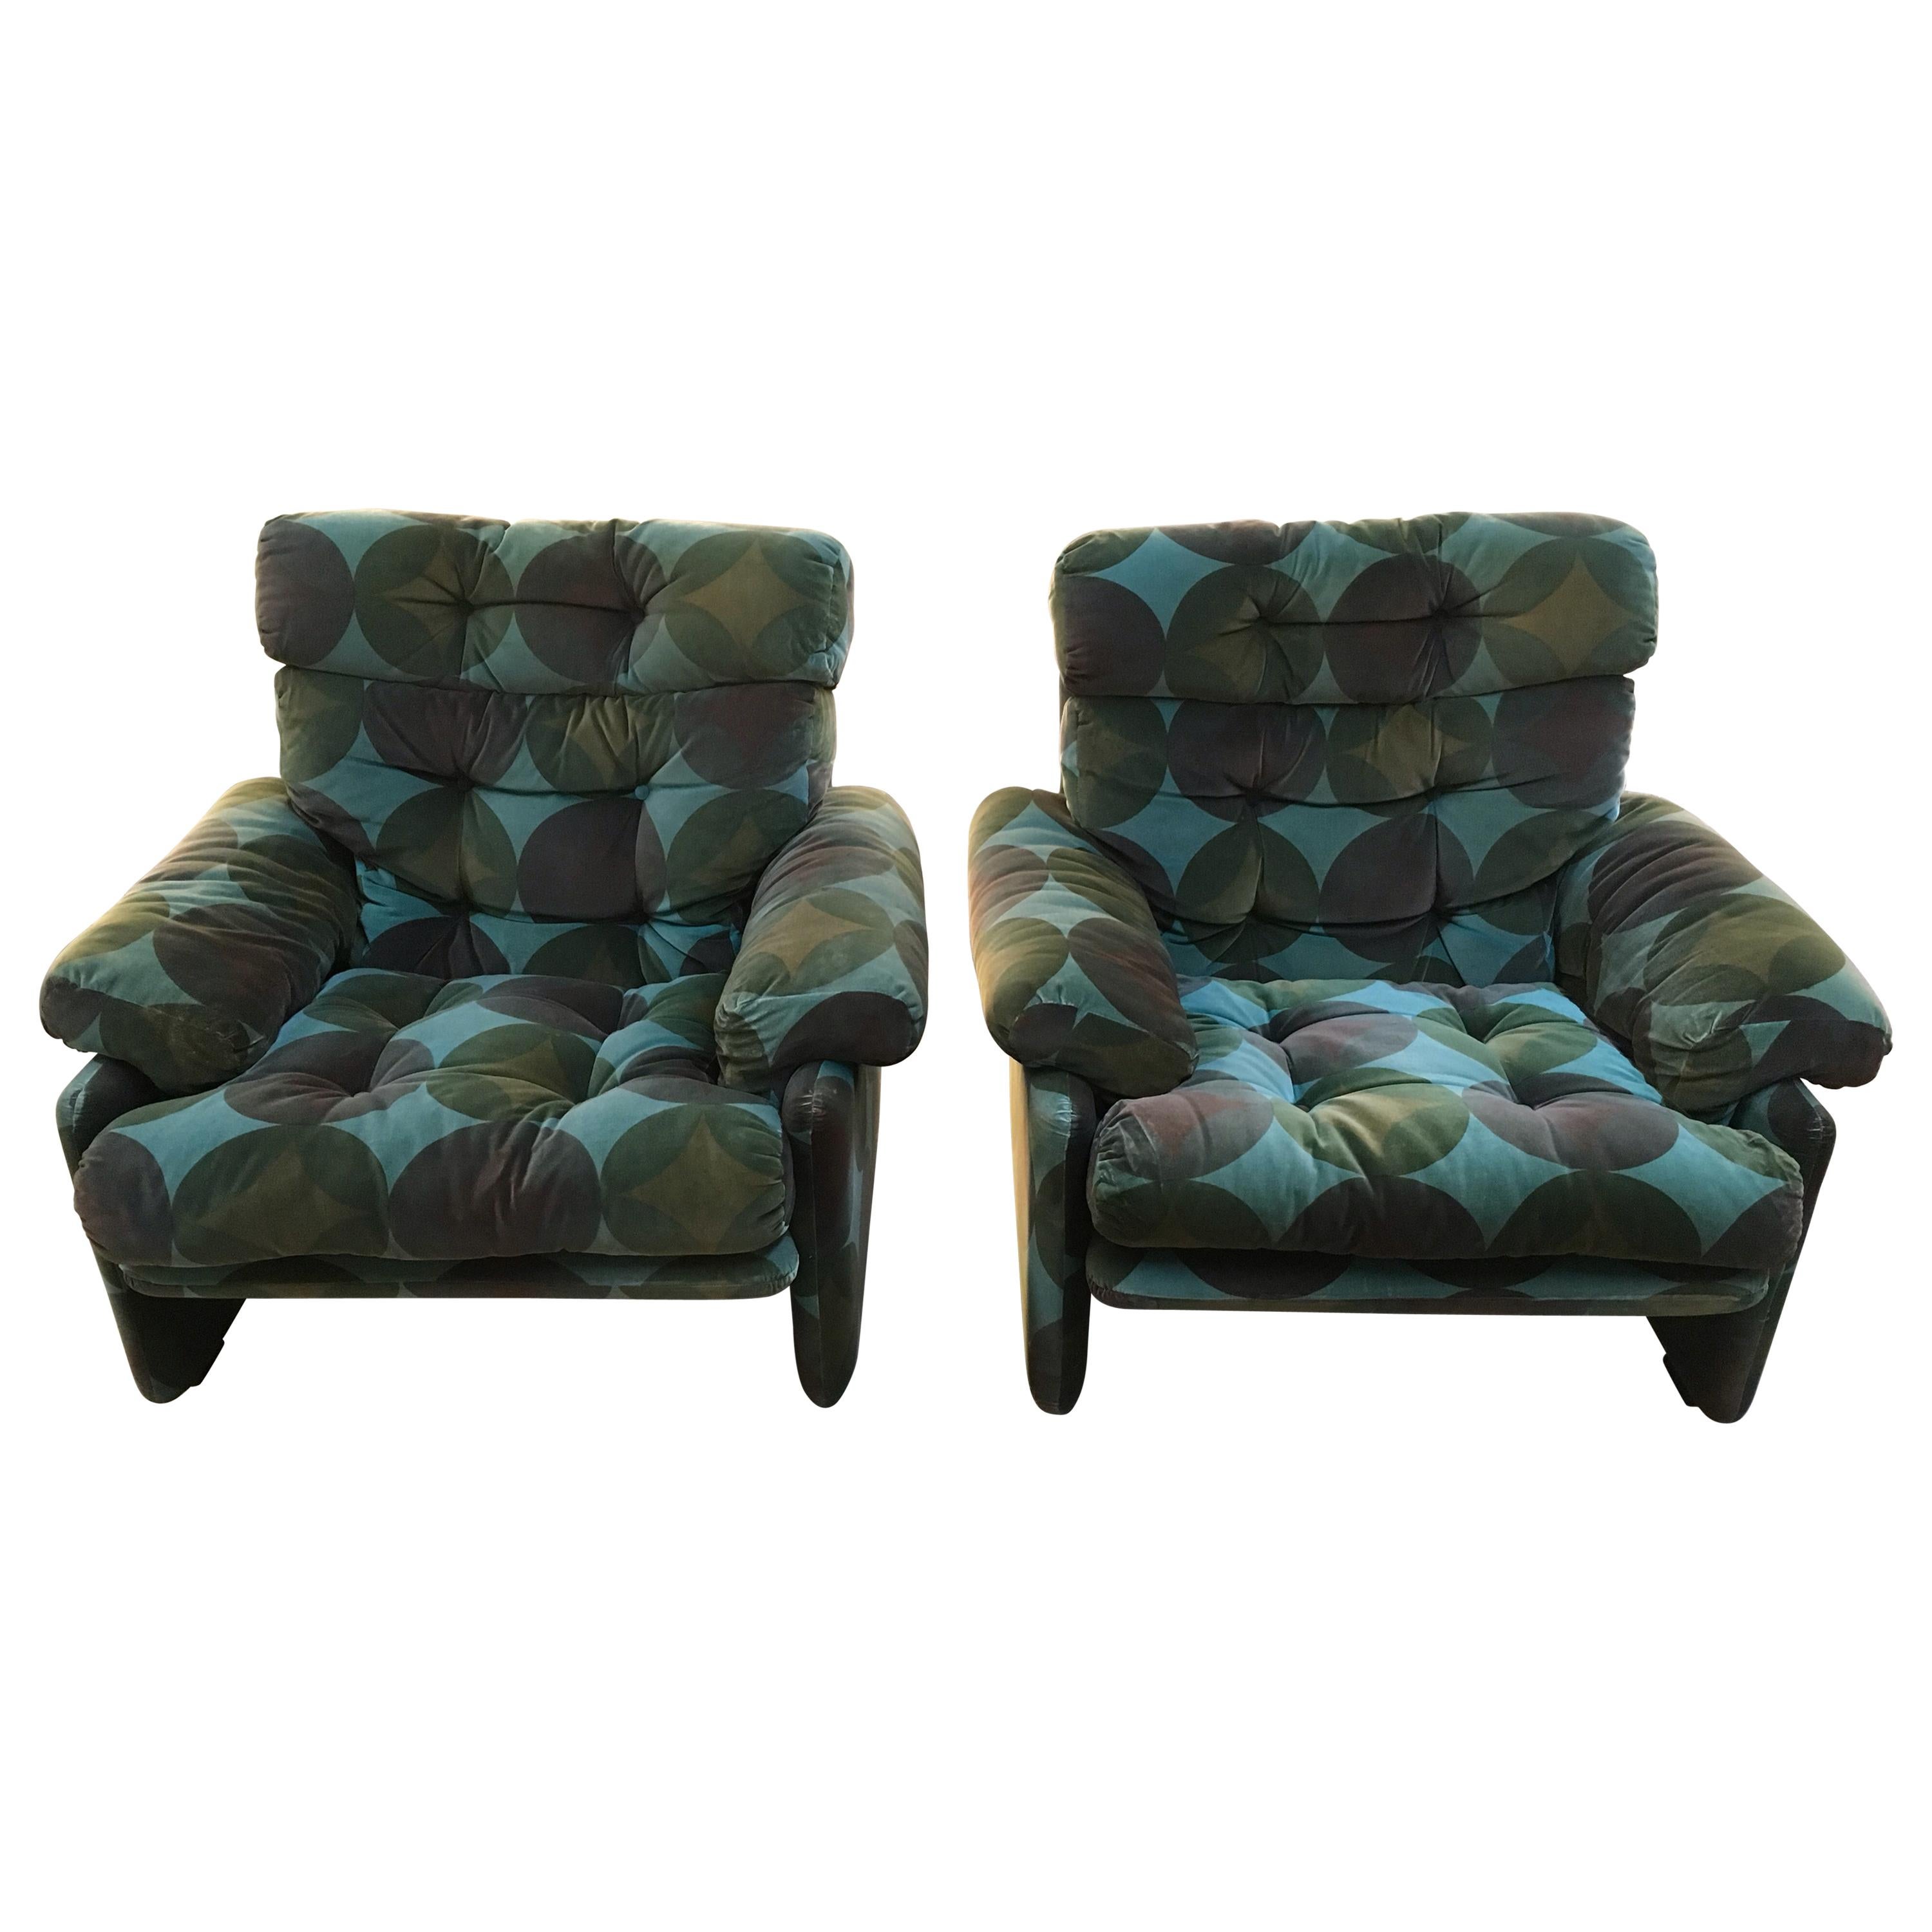 Mid-Century Modern Italian Pair of C&B Armchairs by Tobia Scarpa, 1970s For Sale